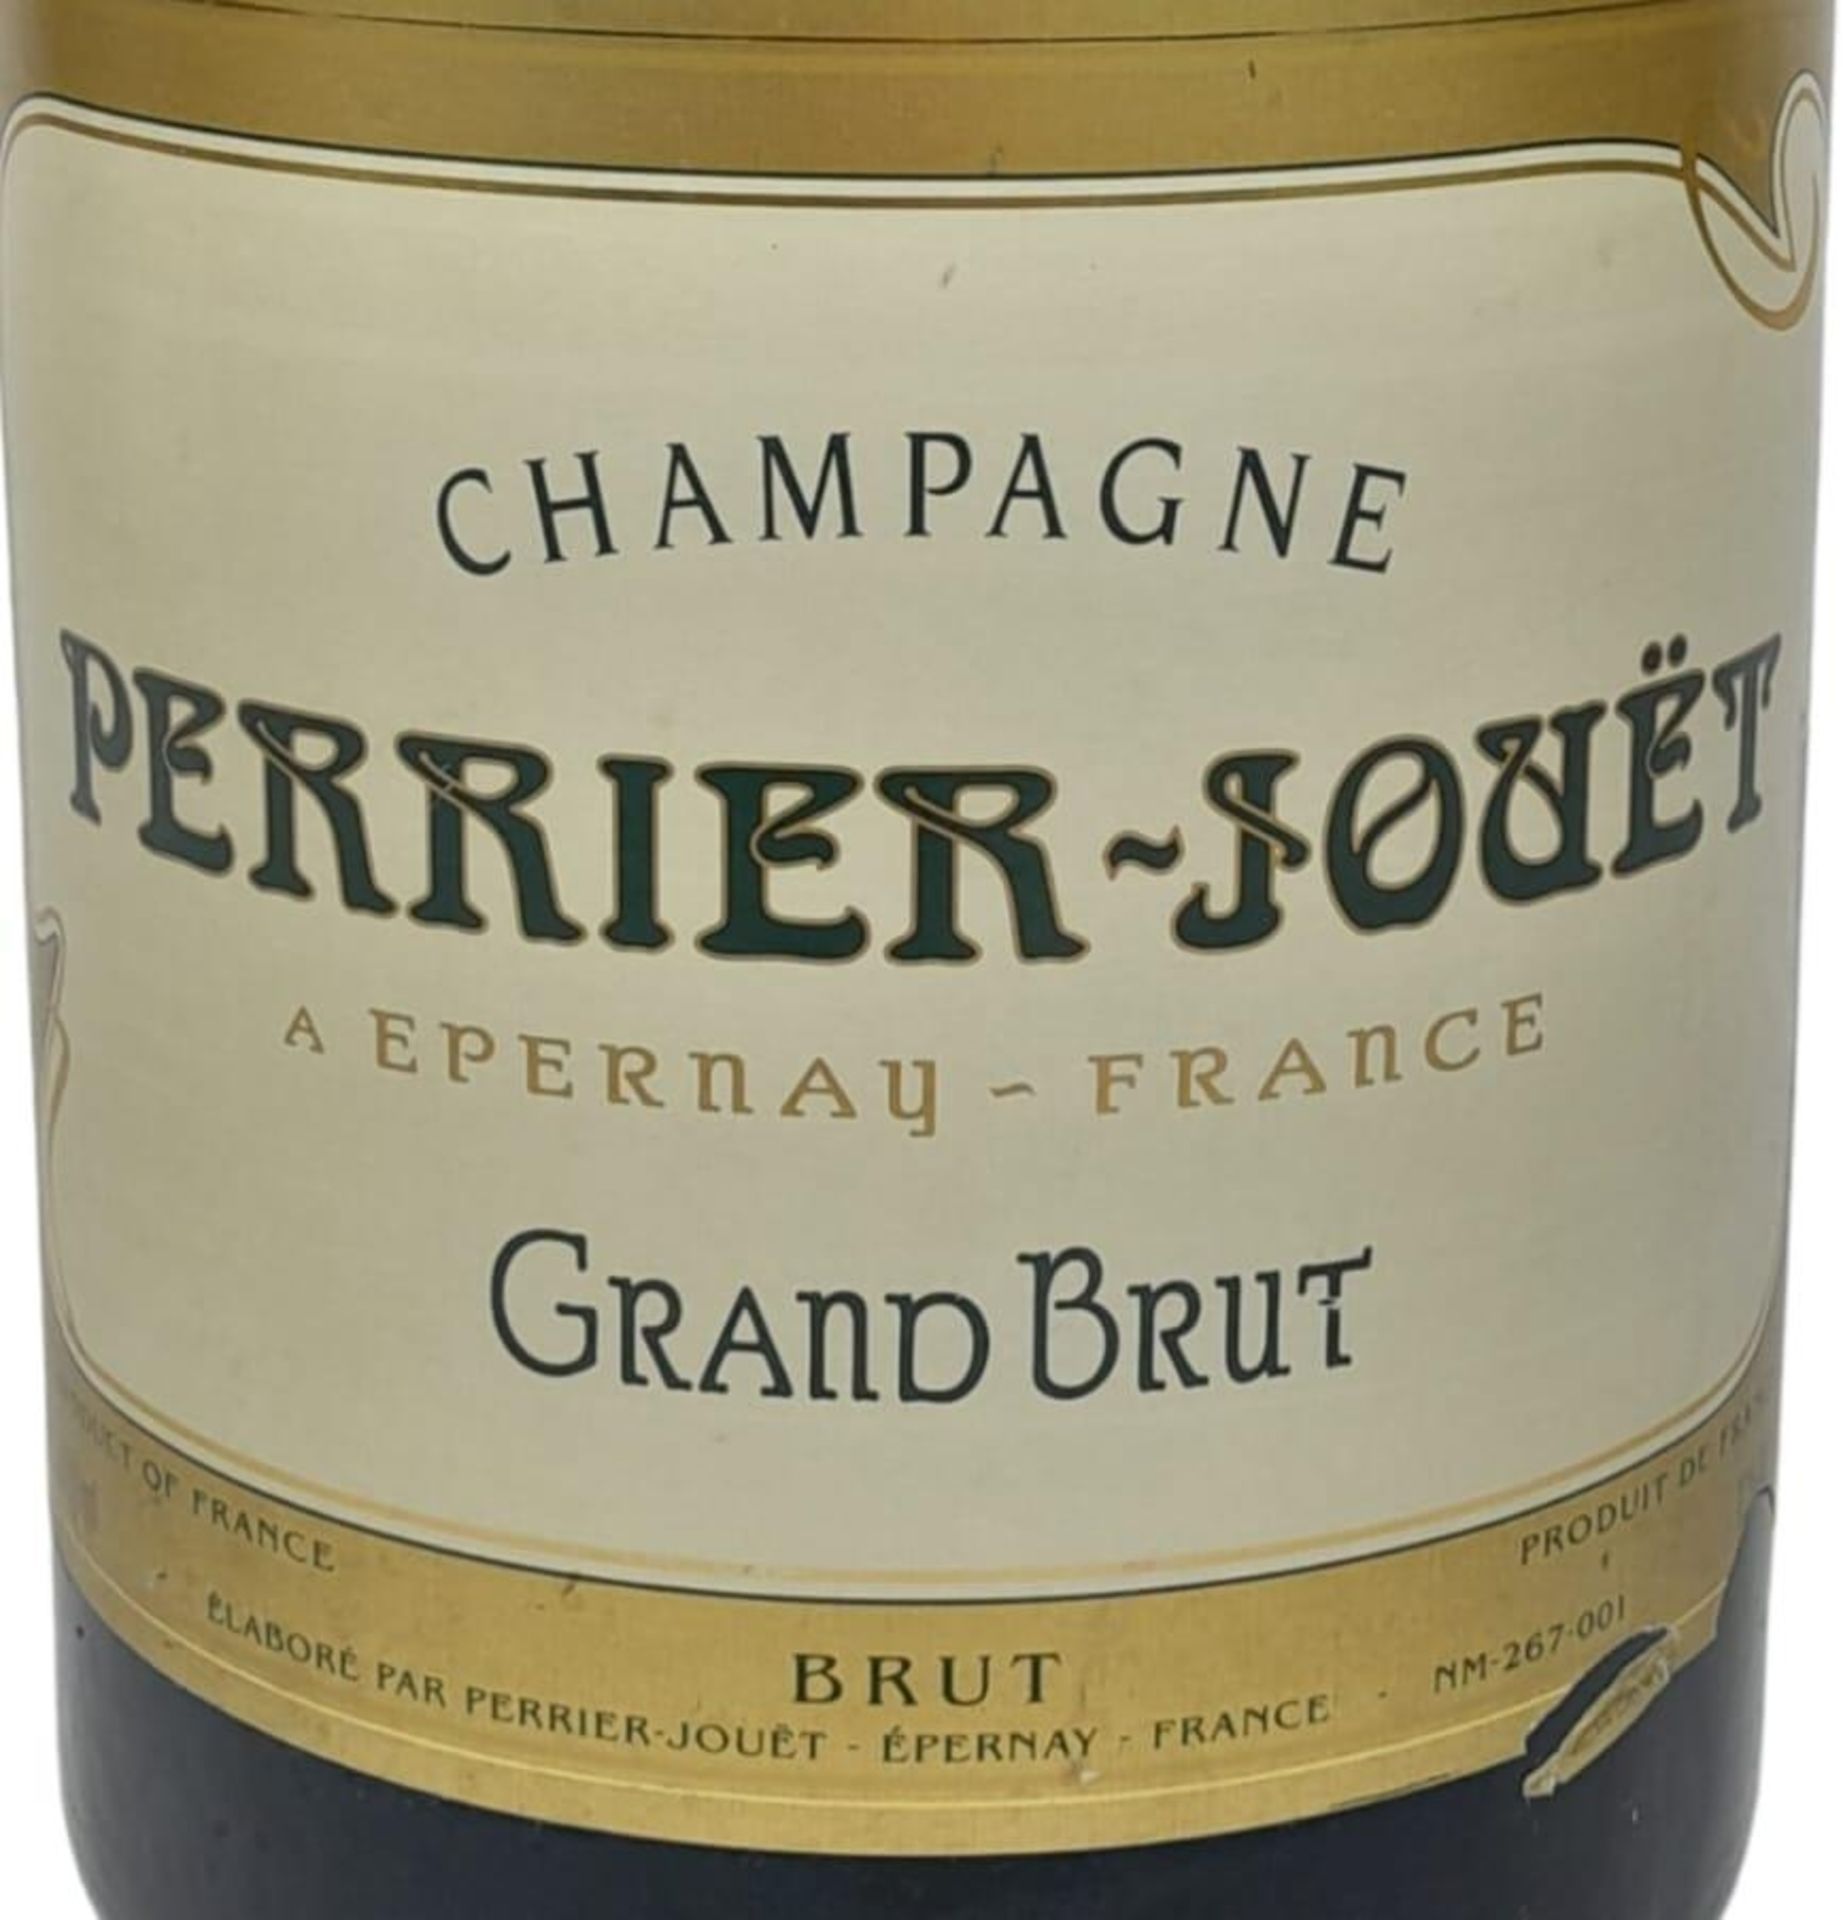 A Salmanazar (12 bottles) of Perrier-Jouet Branded Champagne. Unfortunately the bottle is empty! - Image 2 of 6